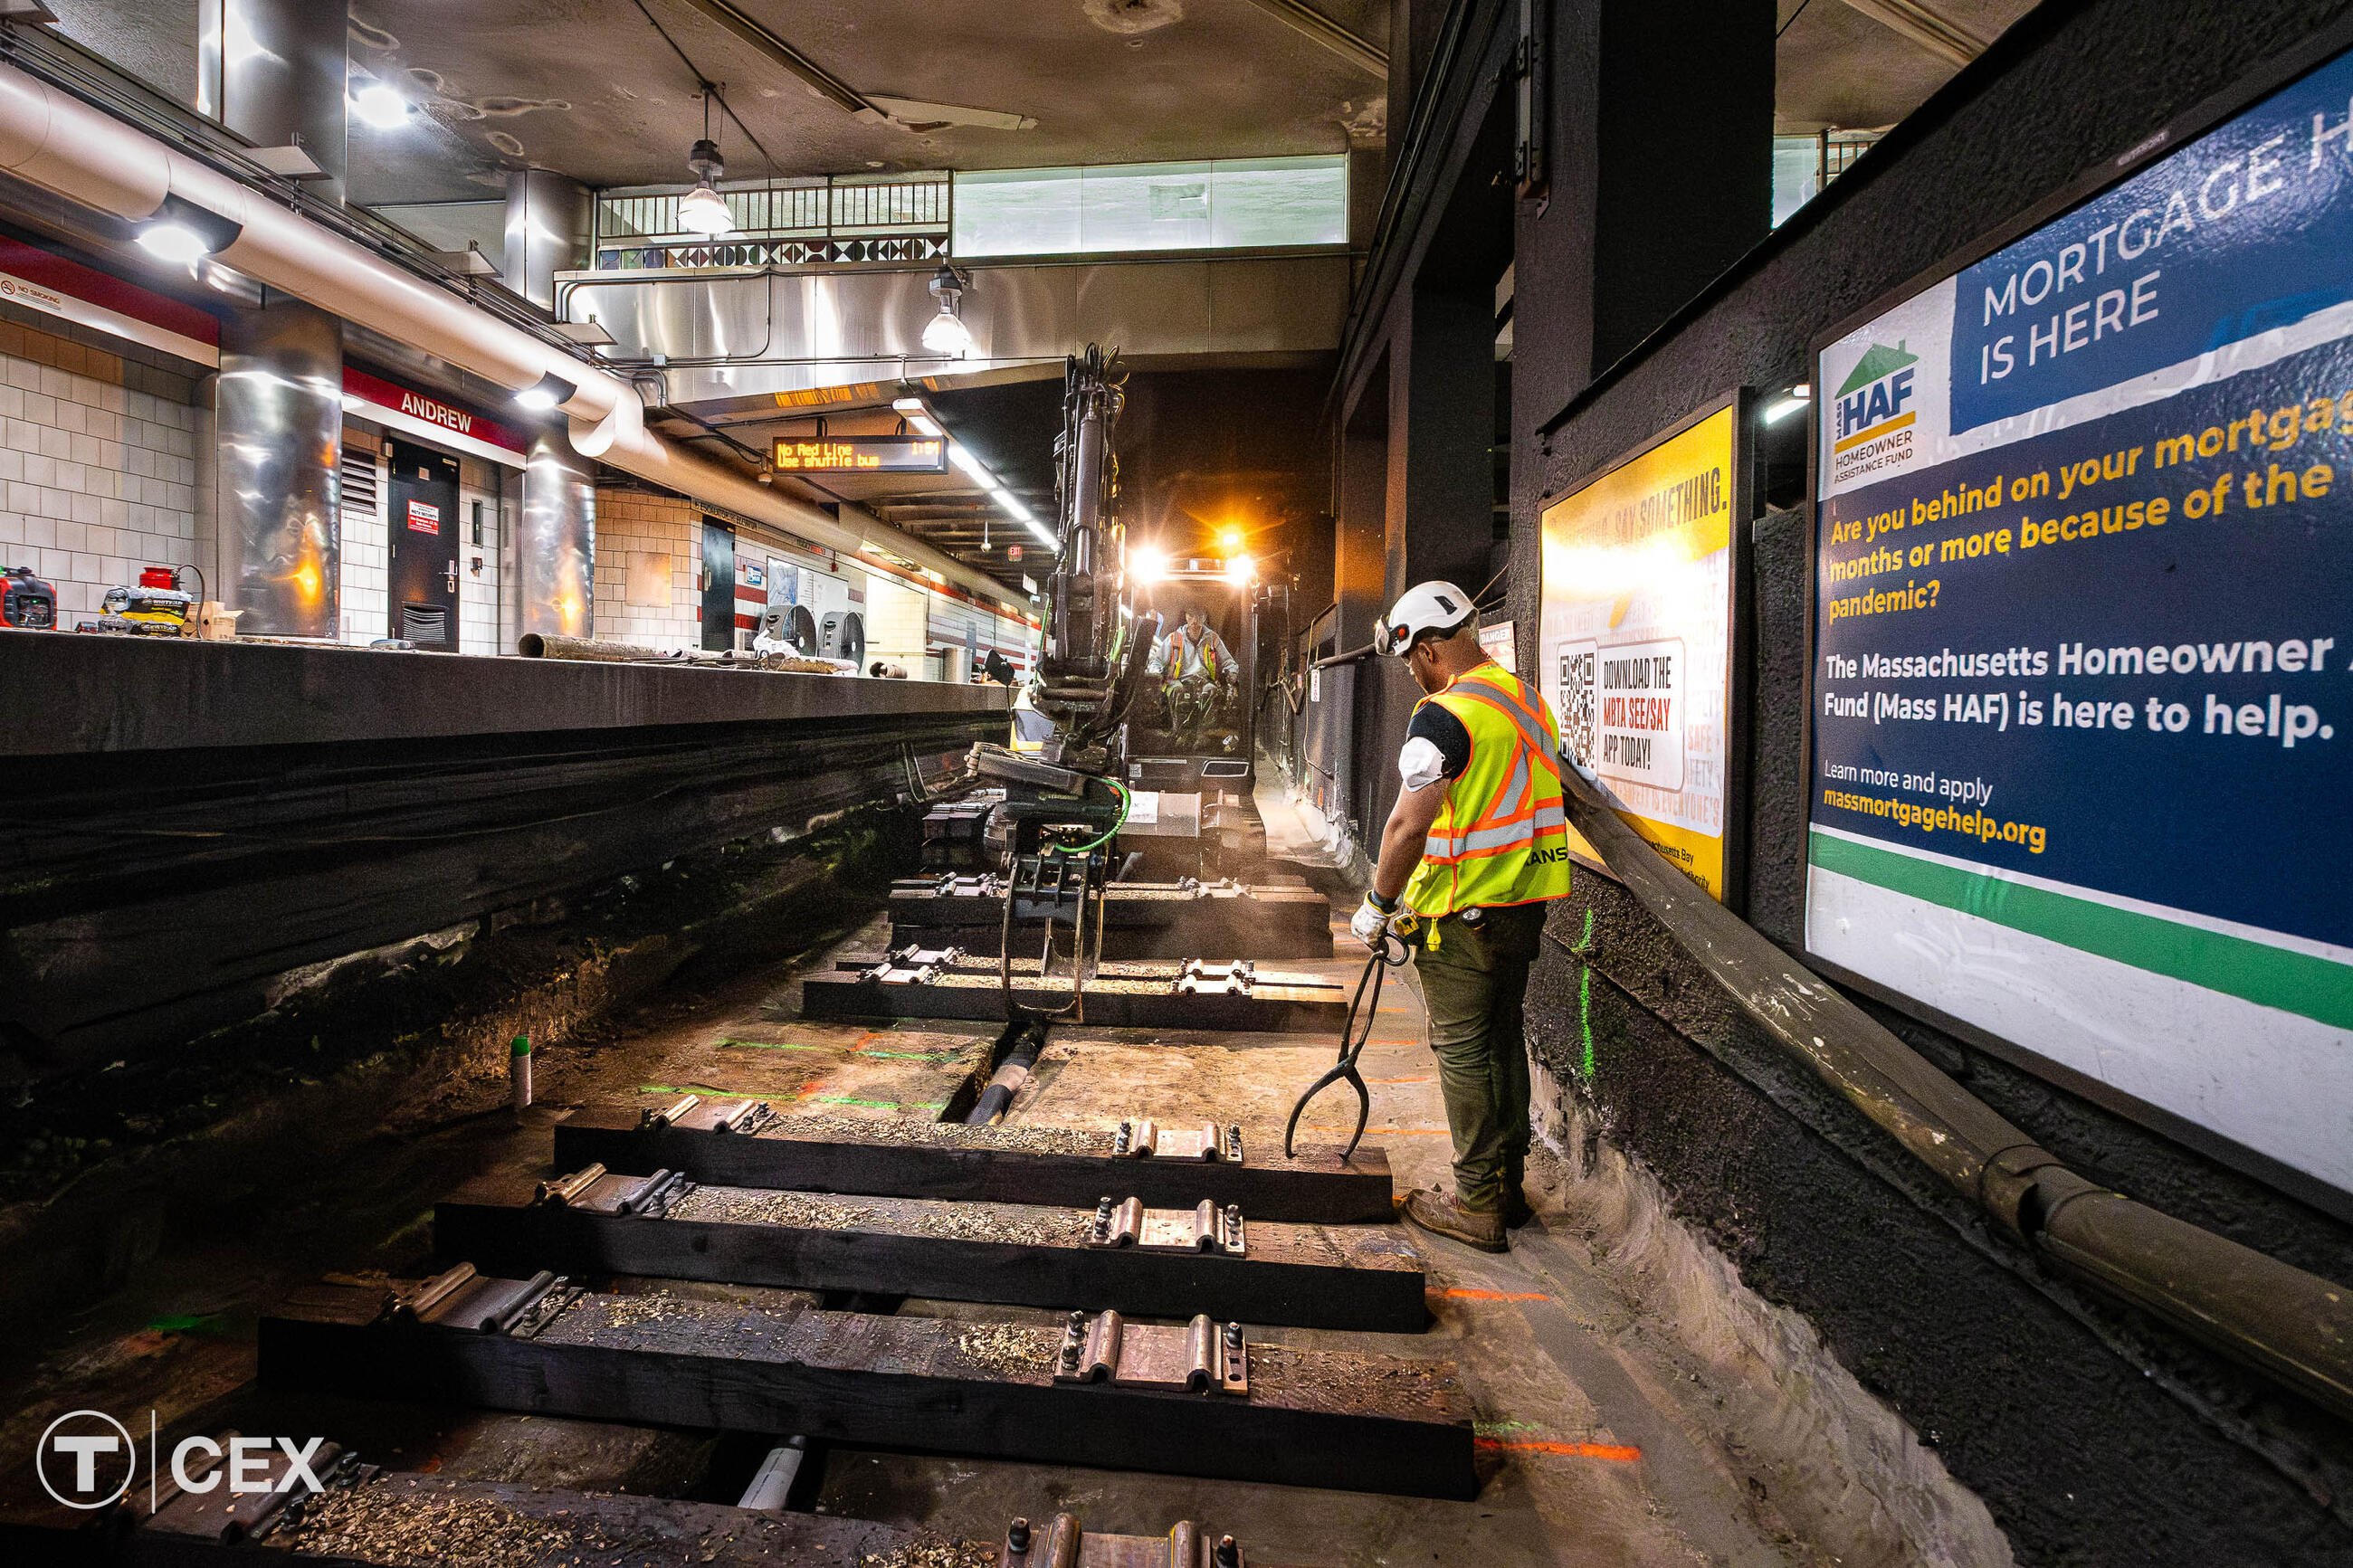 Crews performed tie replacement work along the Red Line. Complimentary photo by the MBTA Customer and Employee Experience Department.